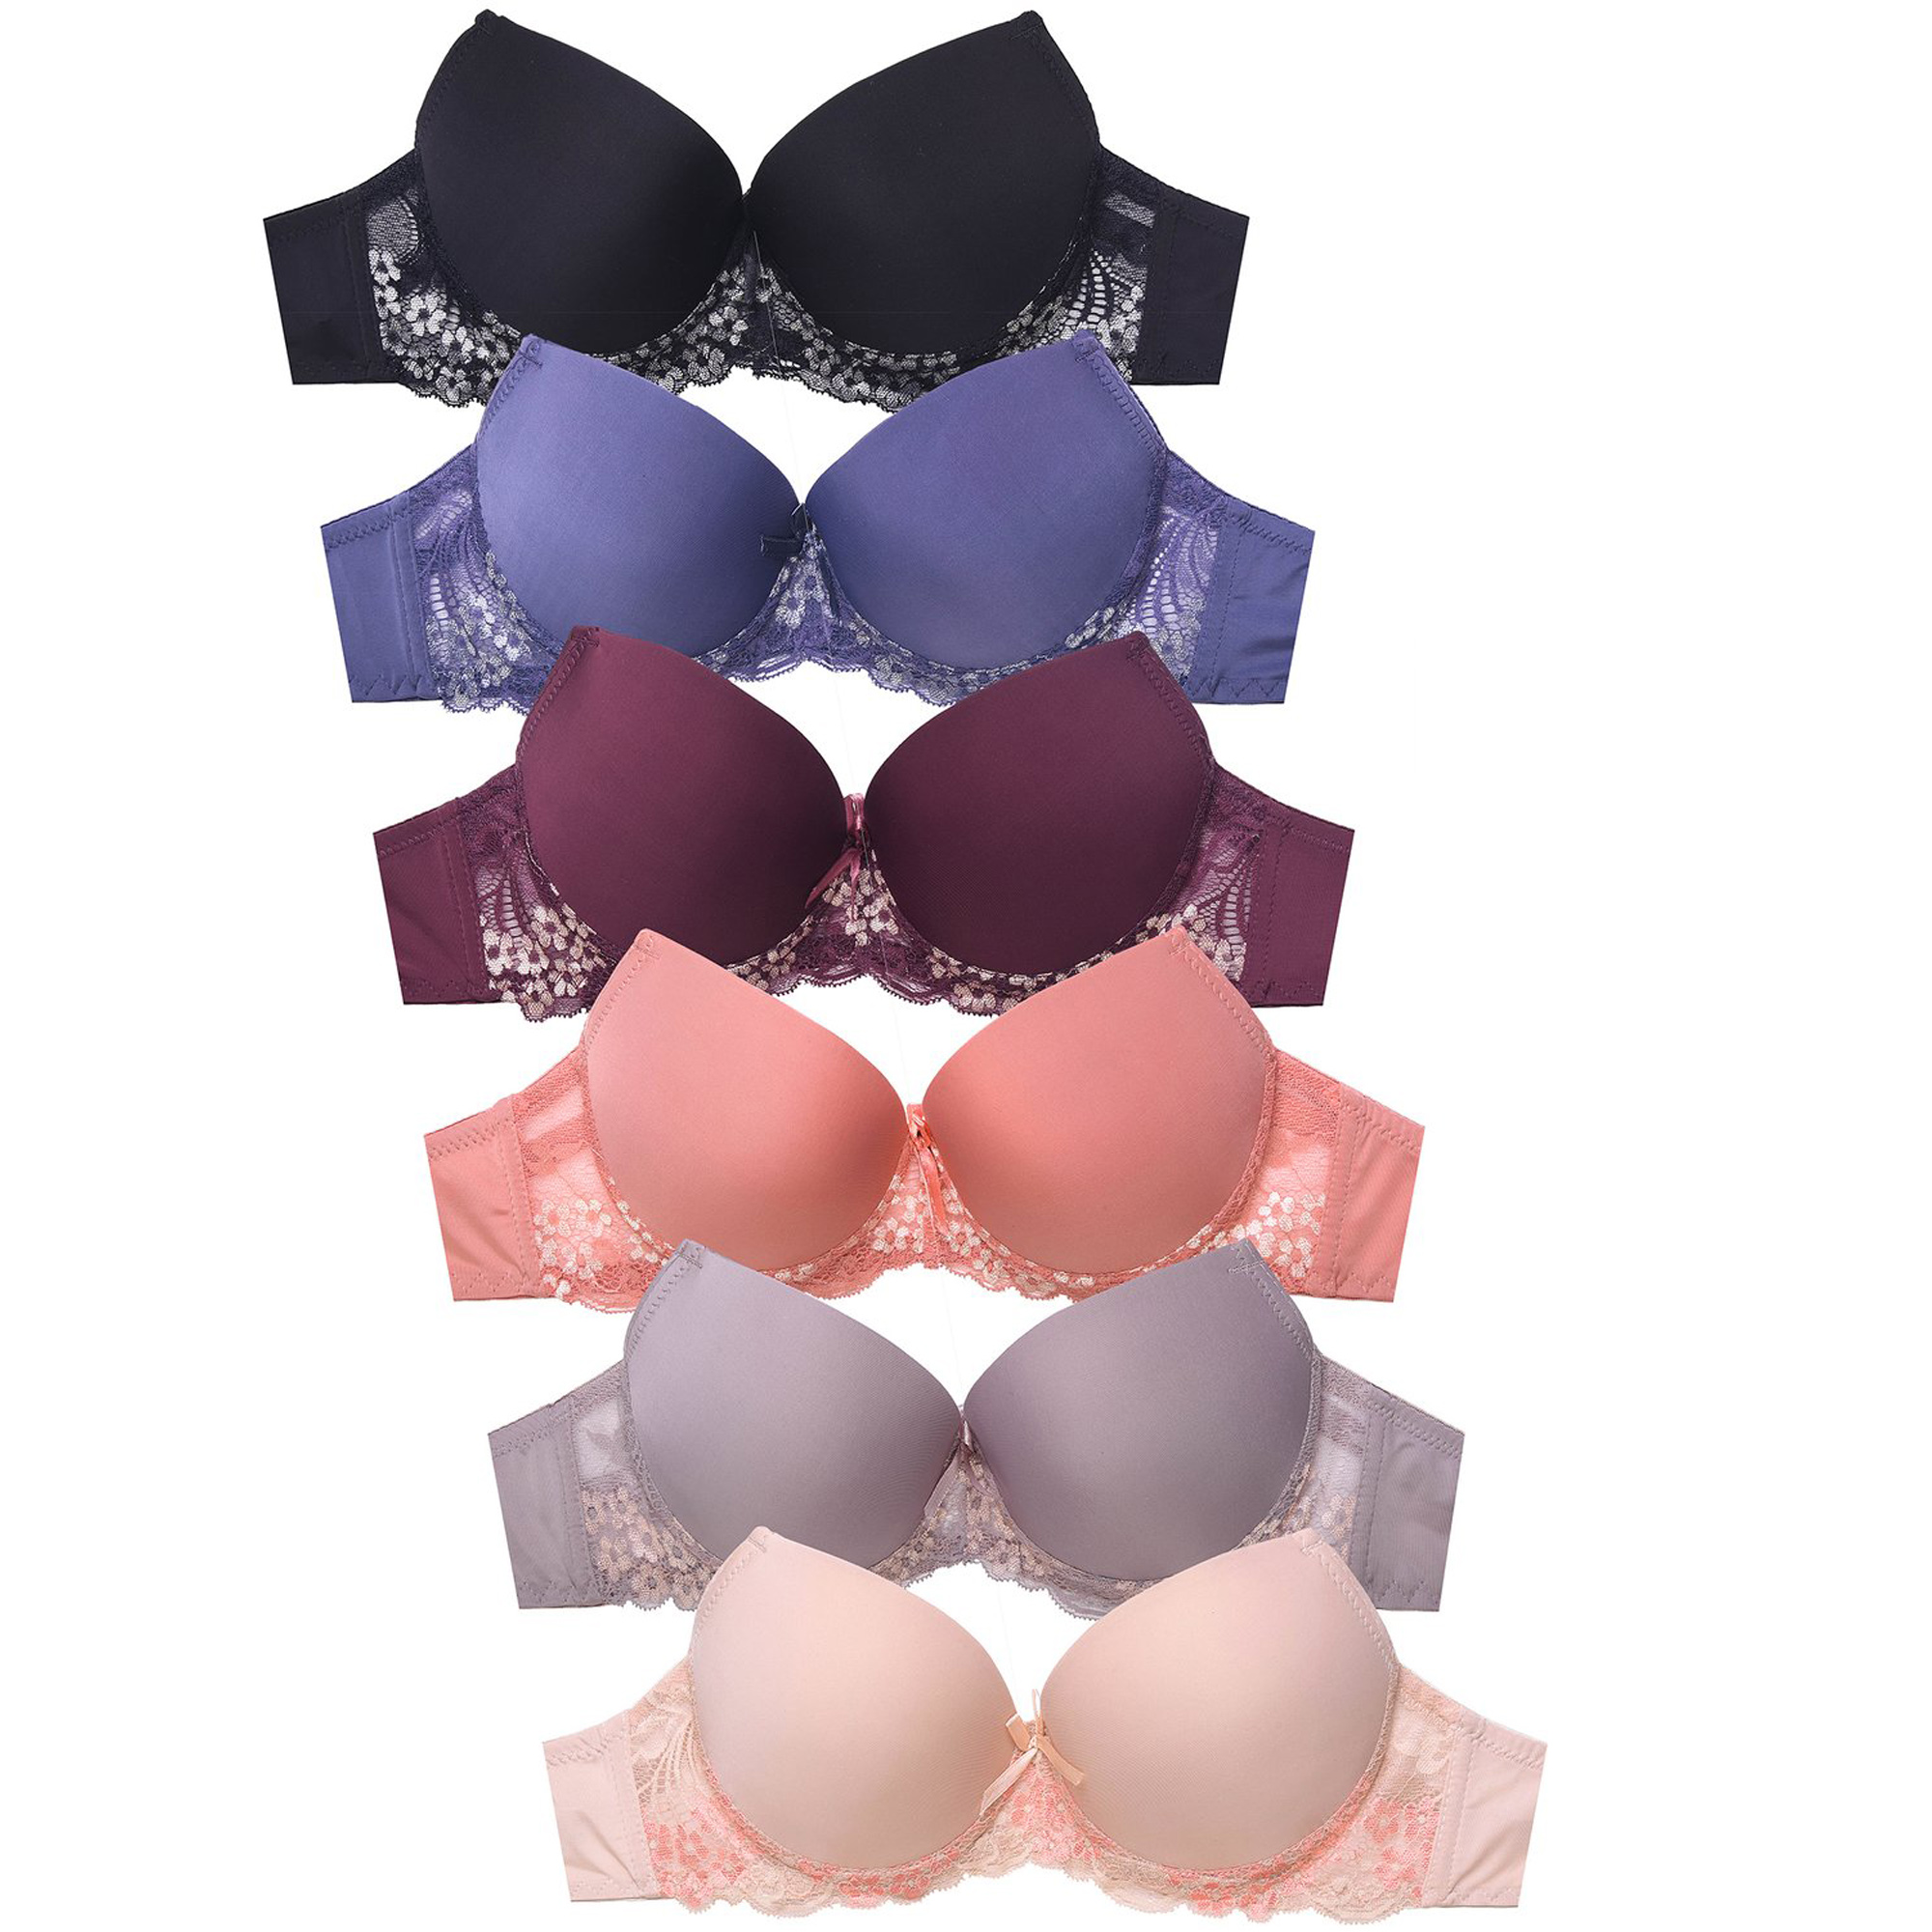 Mamia Womens 6 Multi Pack of Push Up Bras Floral Lace Padded